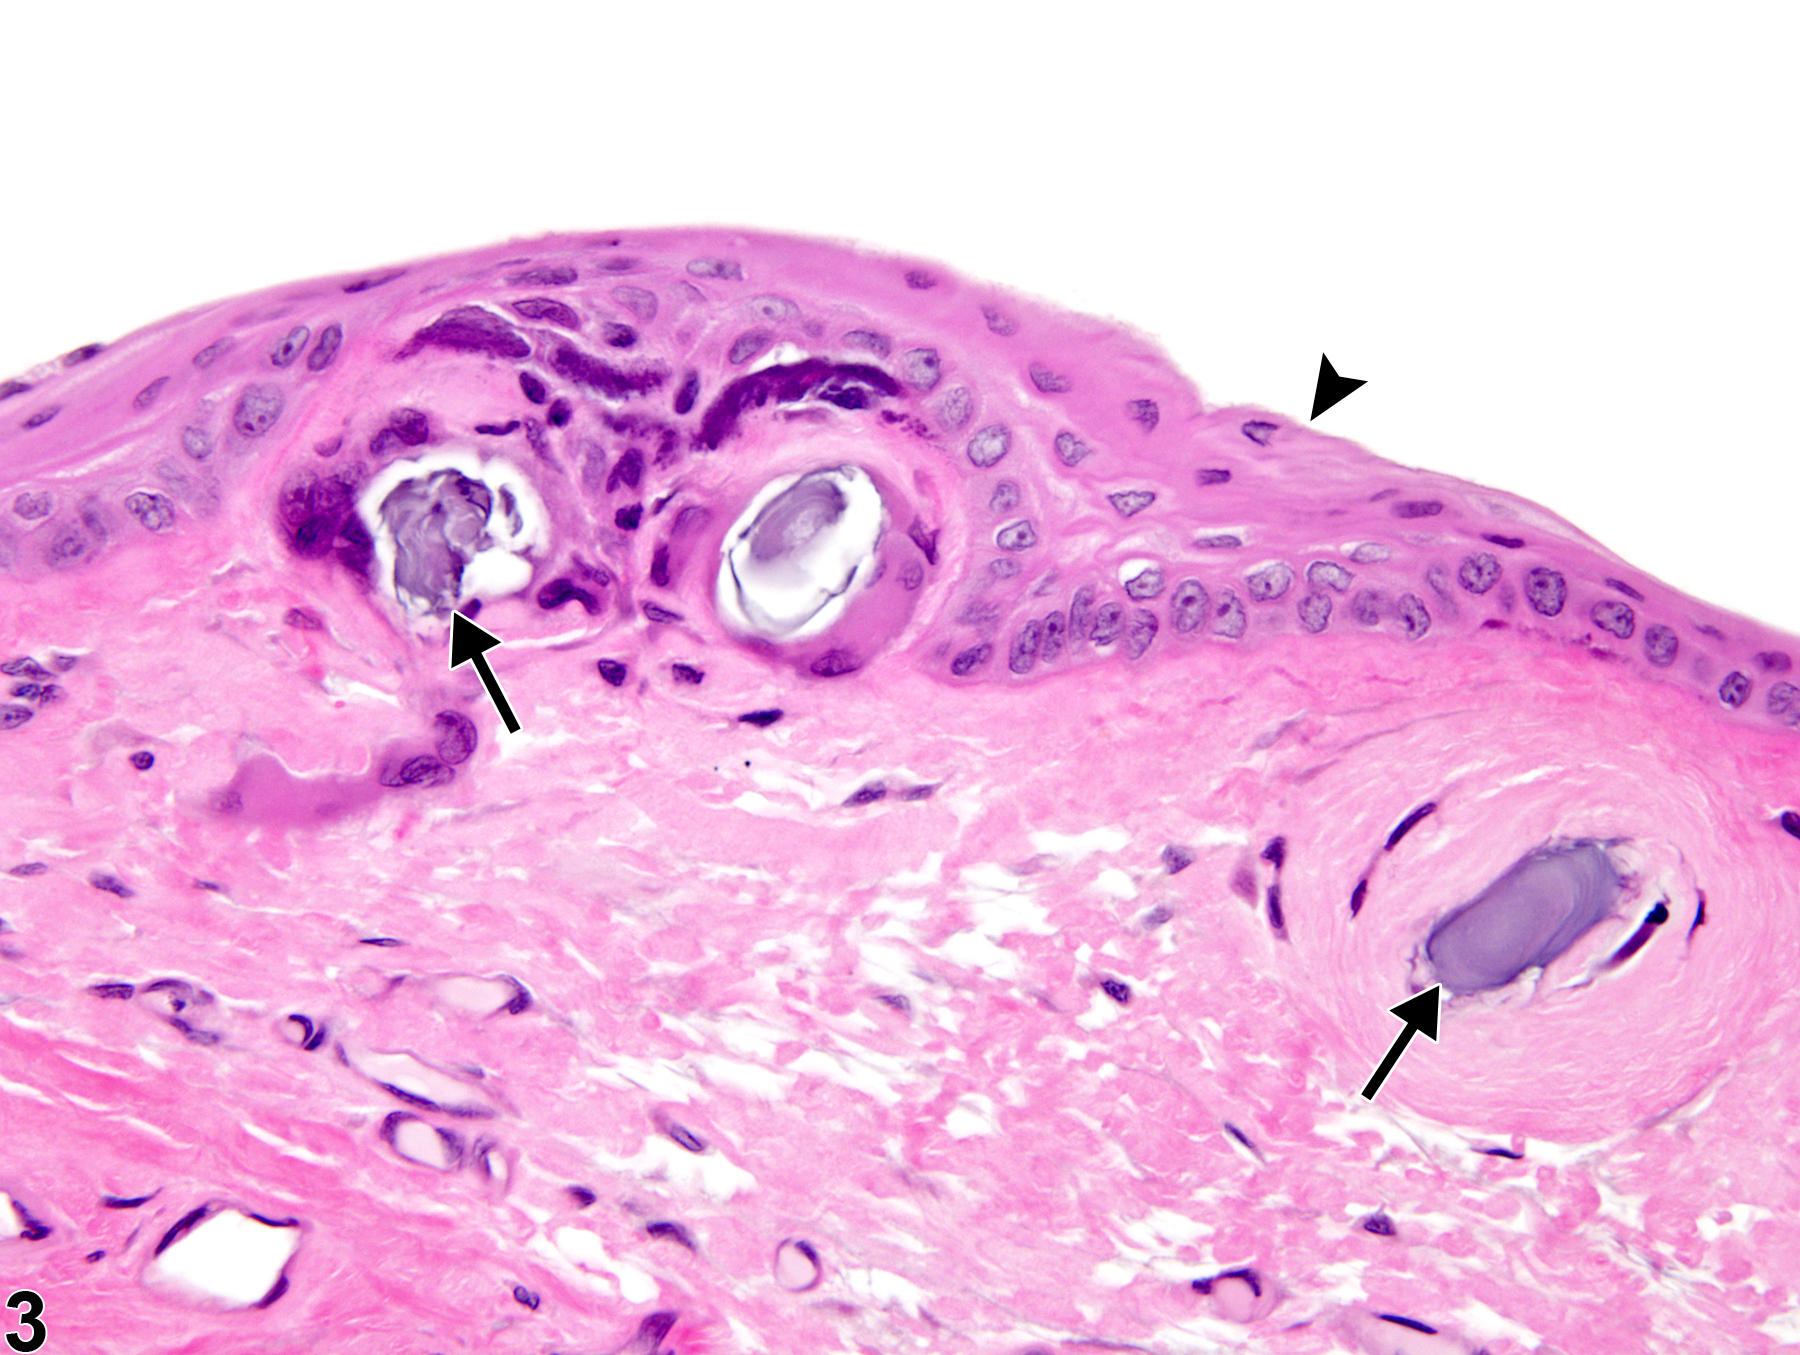 Image of cornea mineralization in the eye from a male F344/N rat in a chronic study